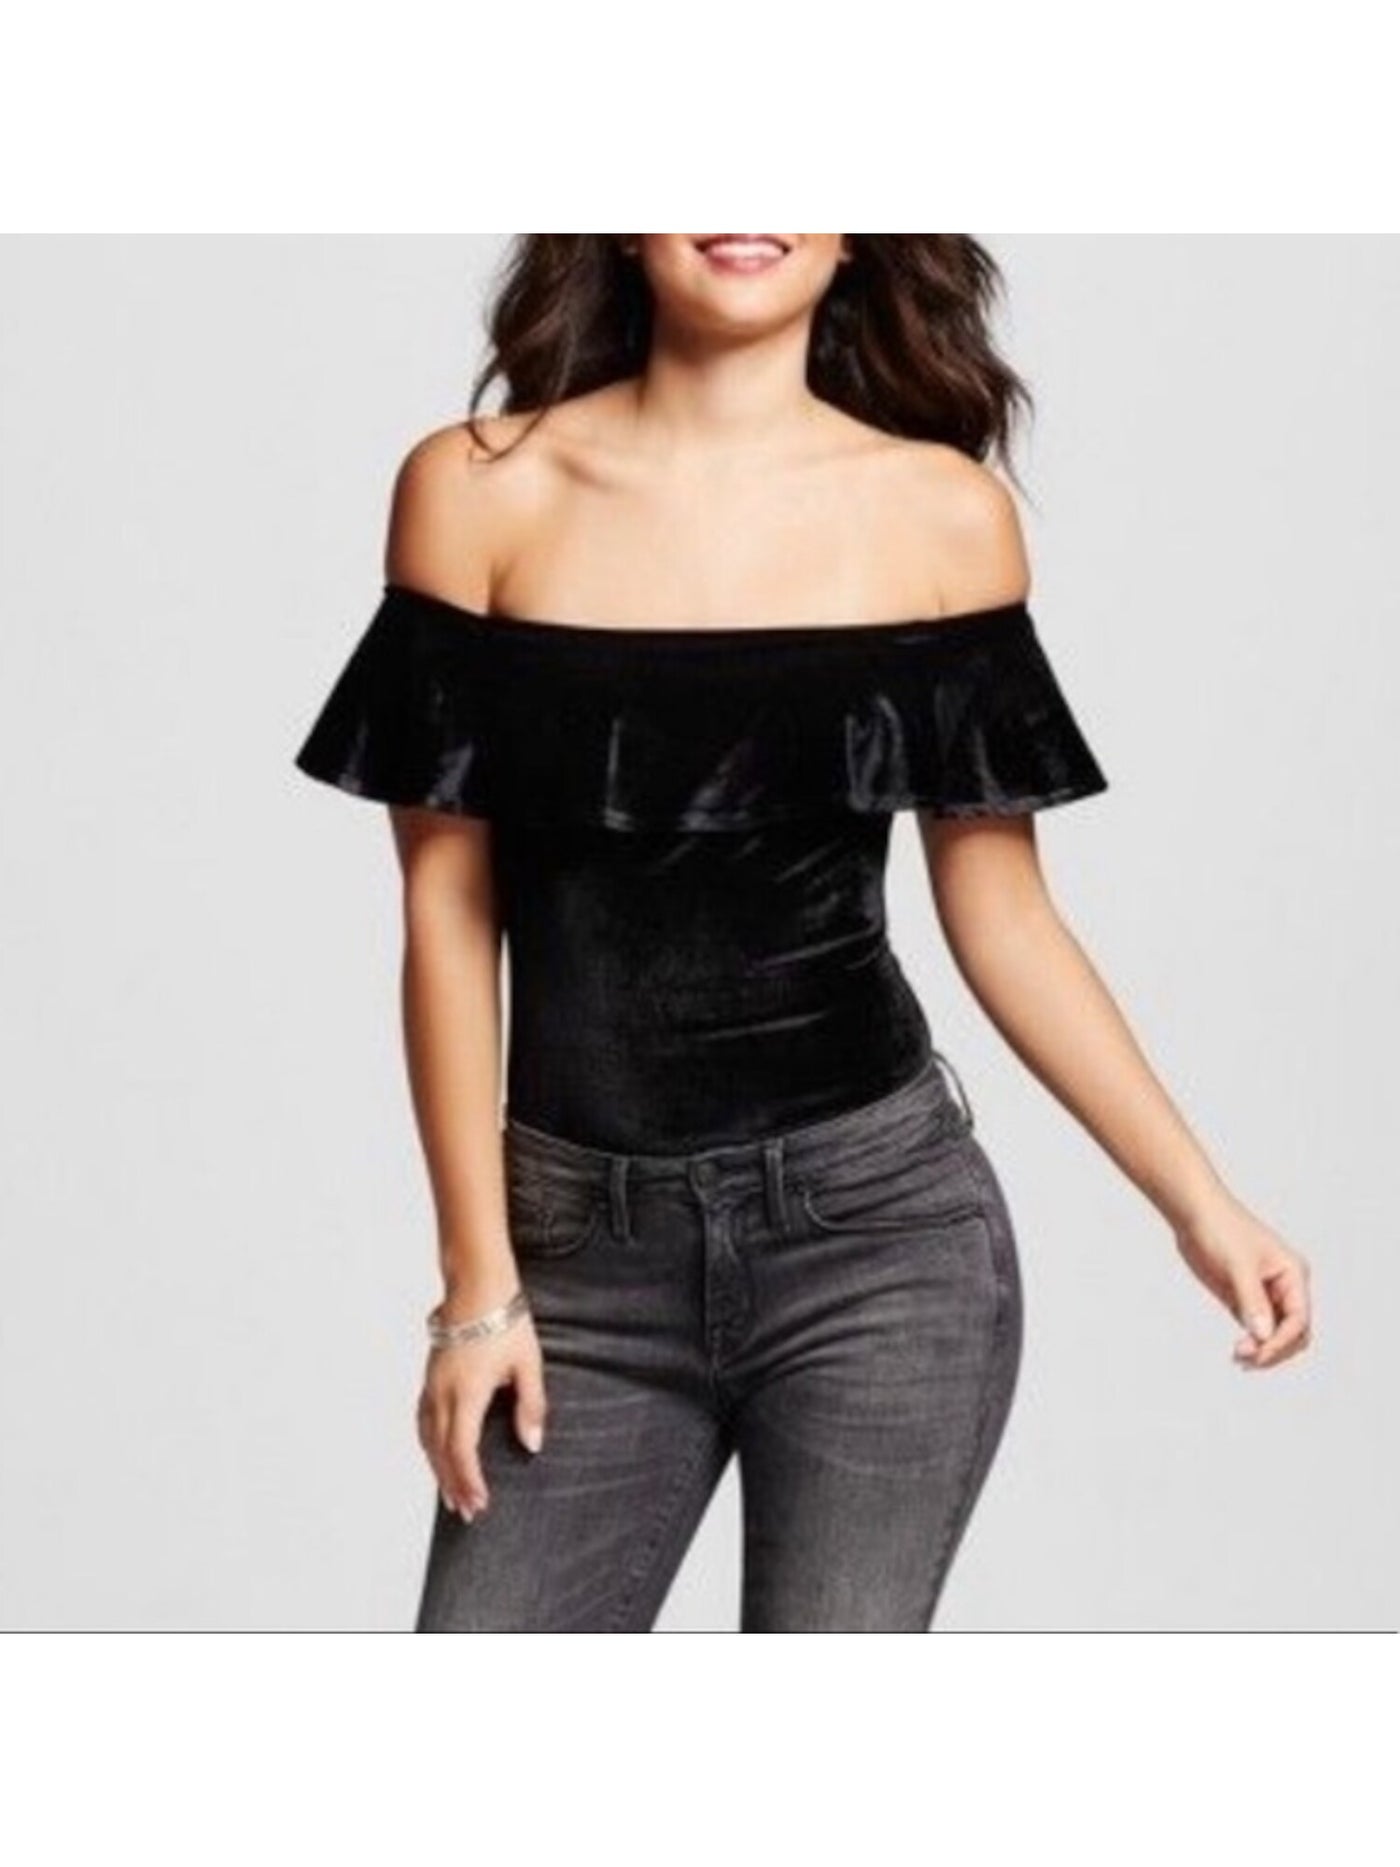 MAISIE Womens Black Stretch Ruffled Velvet Snap-closure Flutter Sleeve Off Shoulder Party Body Suit Top XS